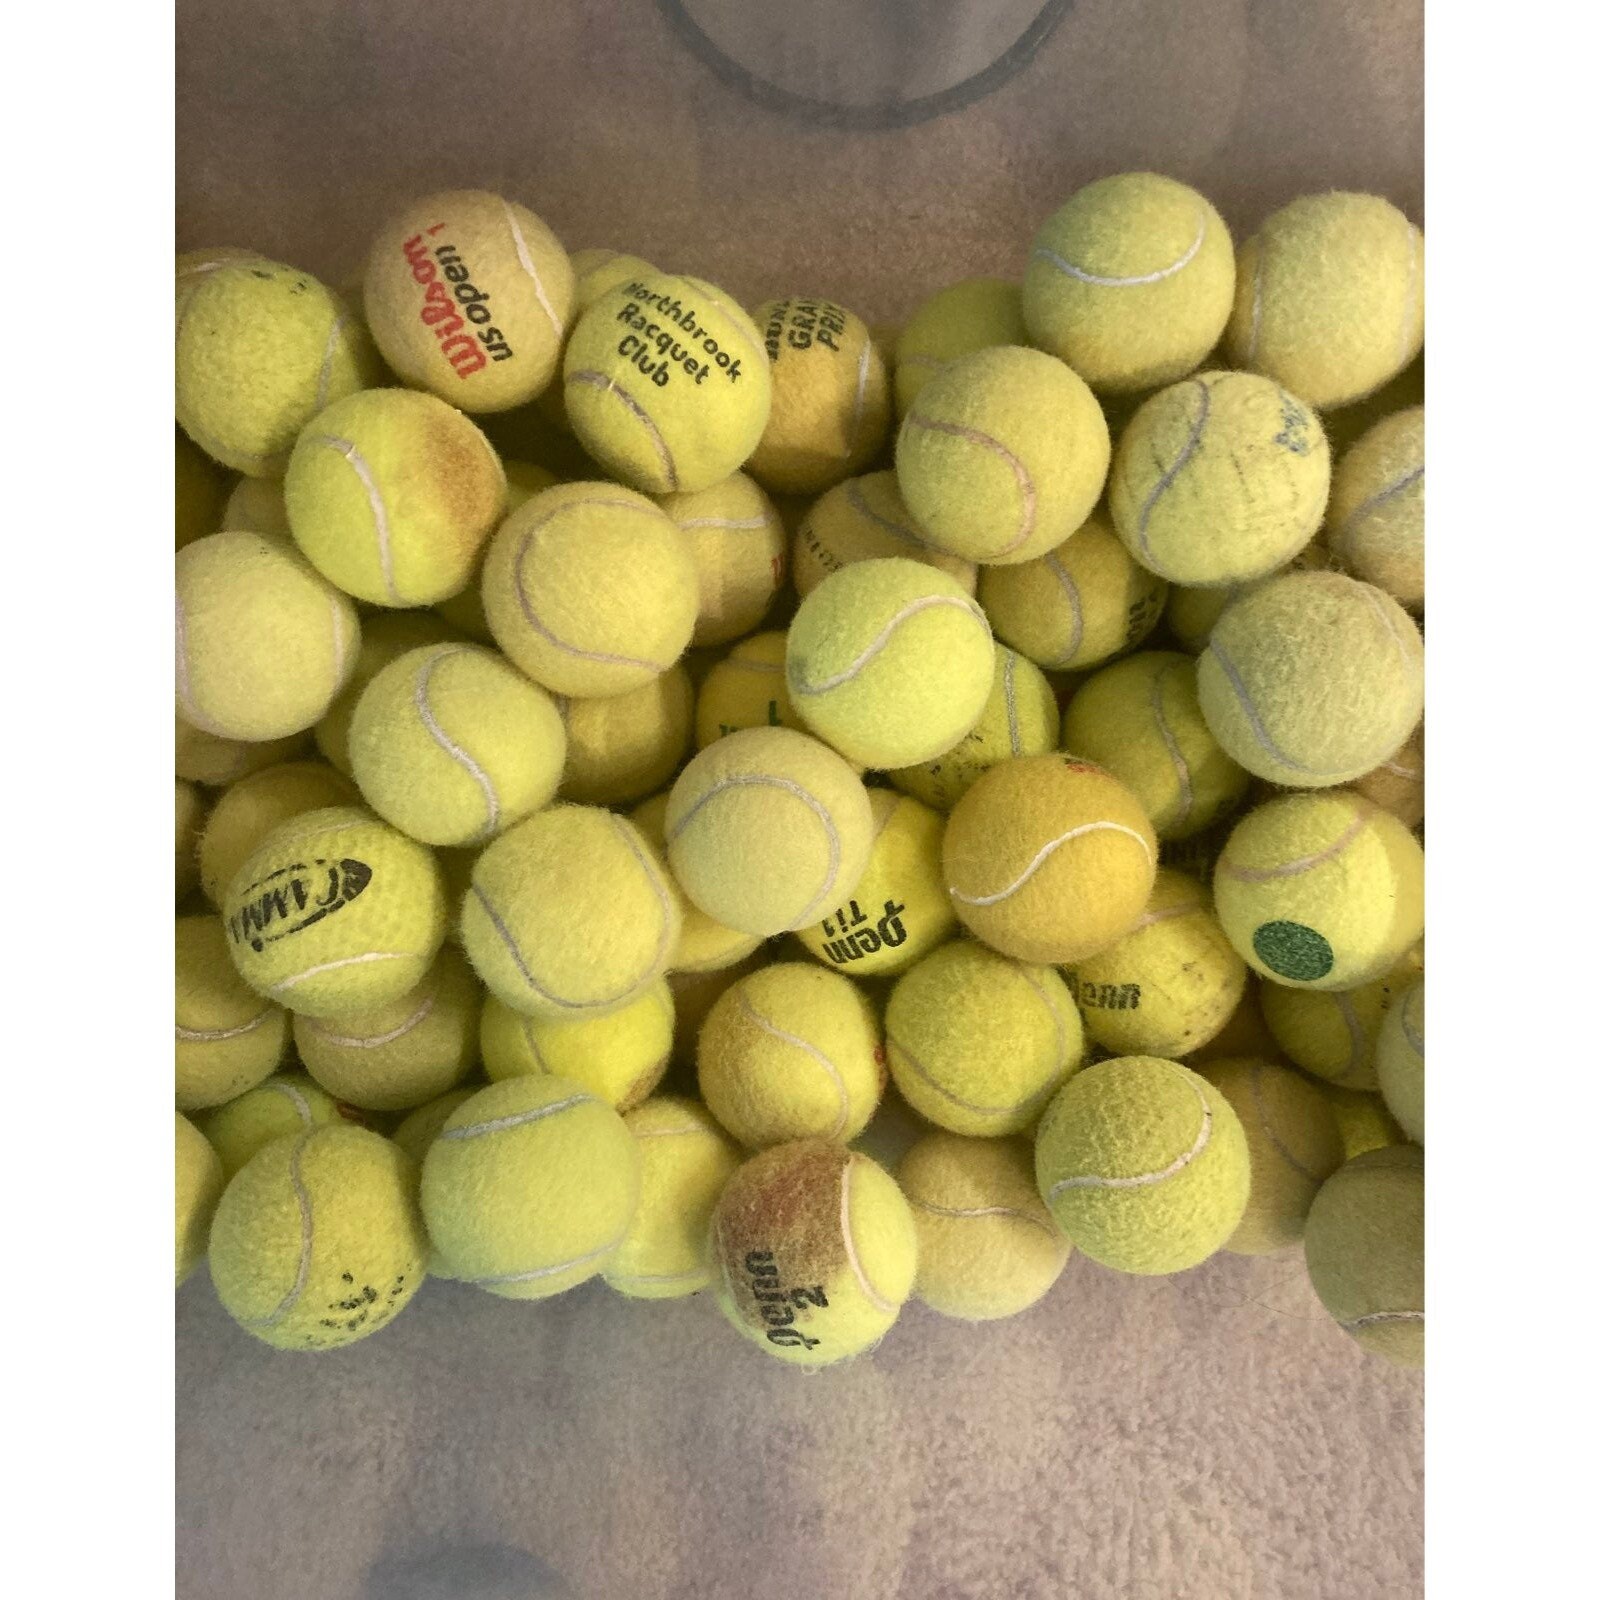 25 used tennis balls FREE FAST SHIPPING Perfect For Dogs & Play 